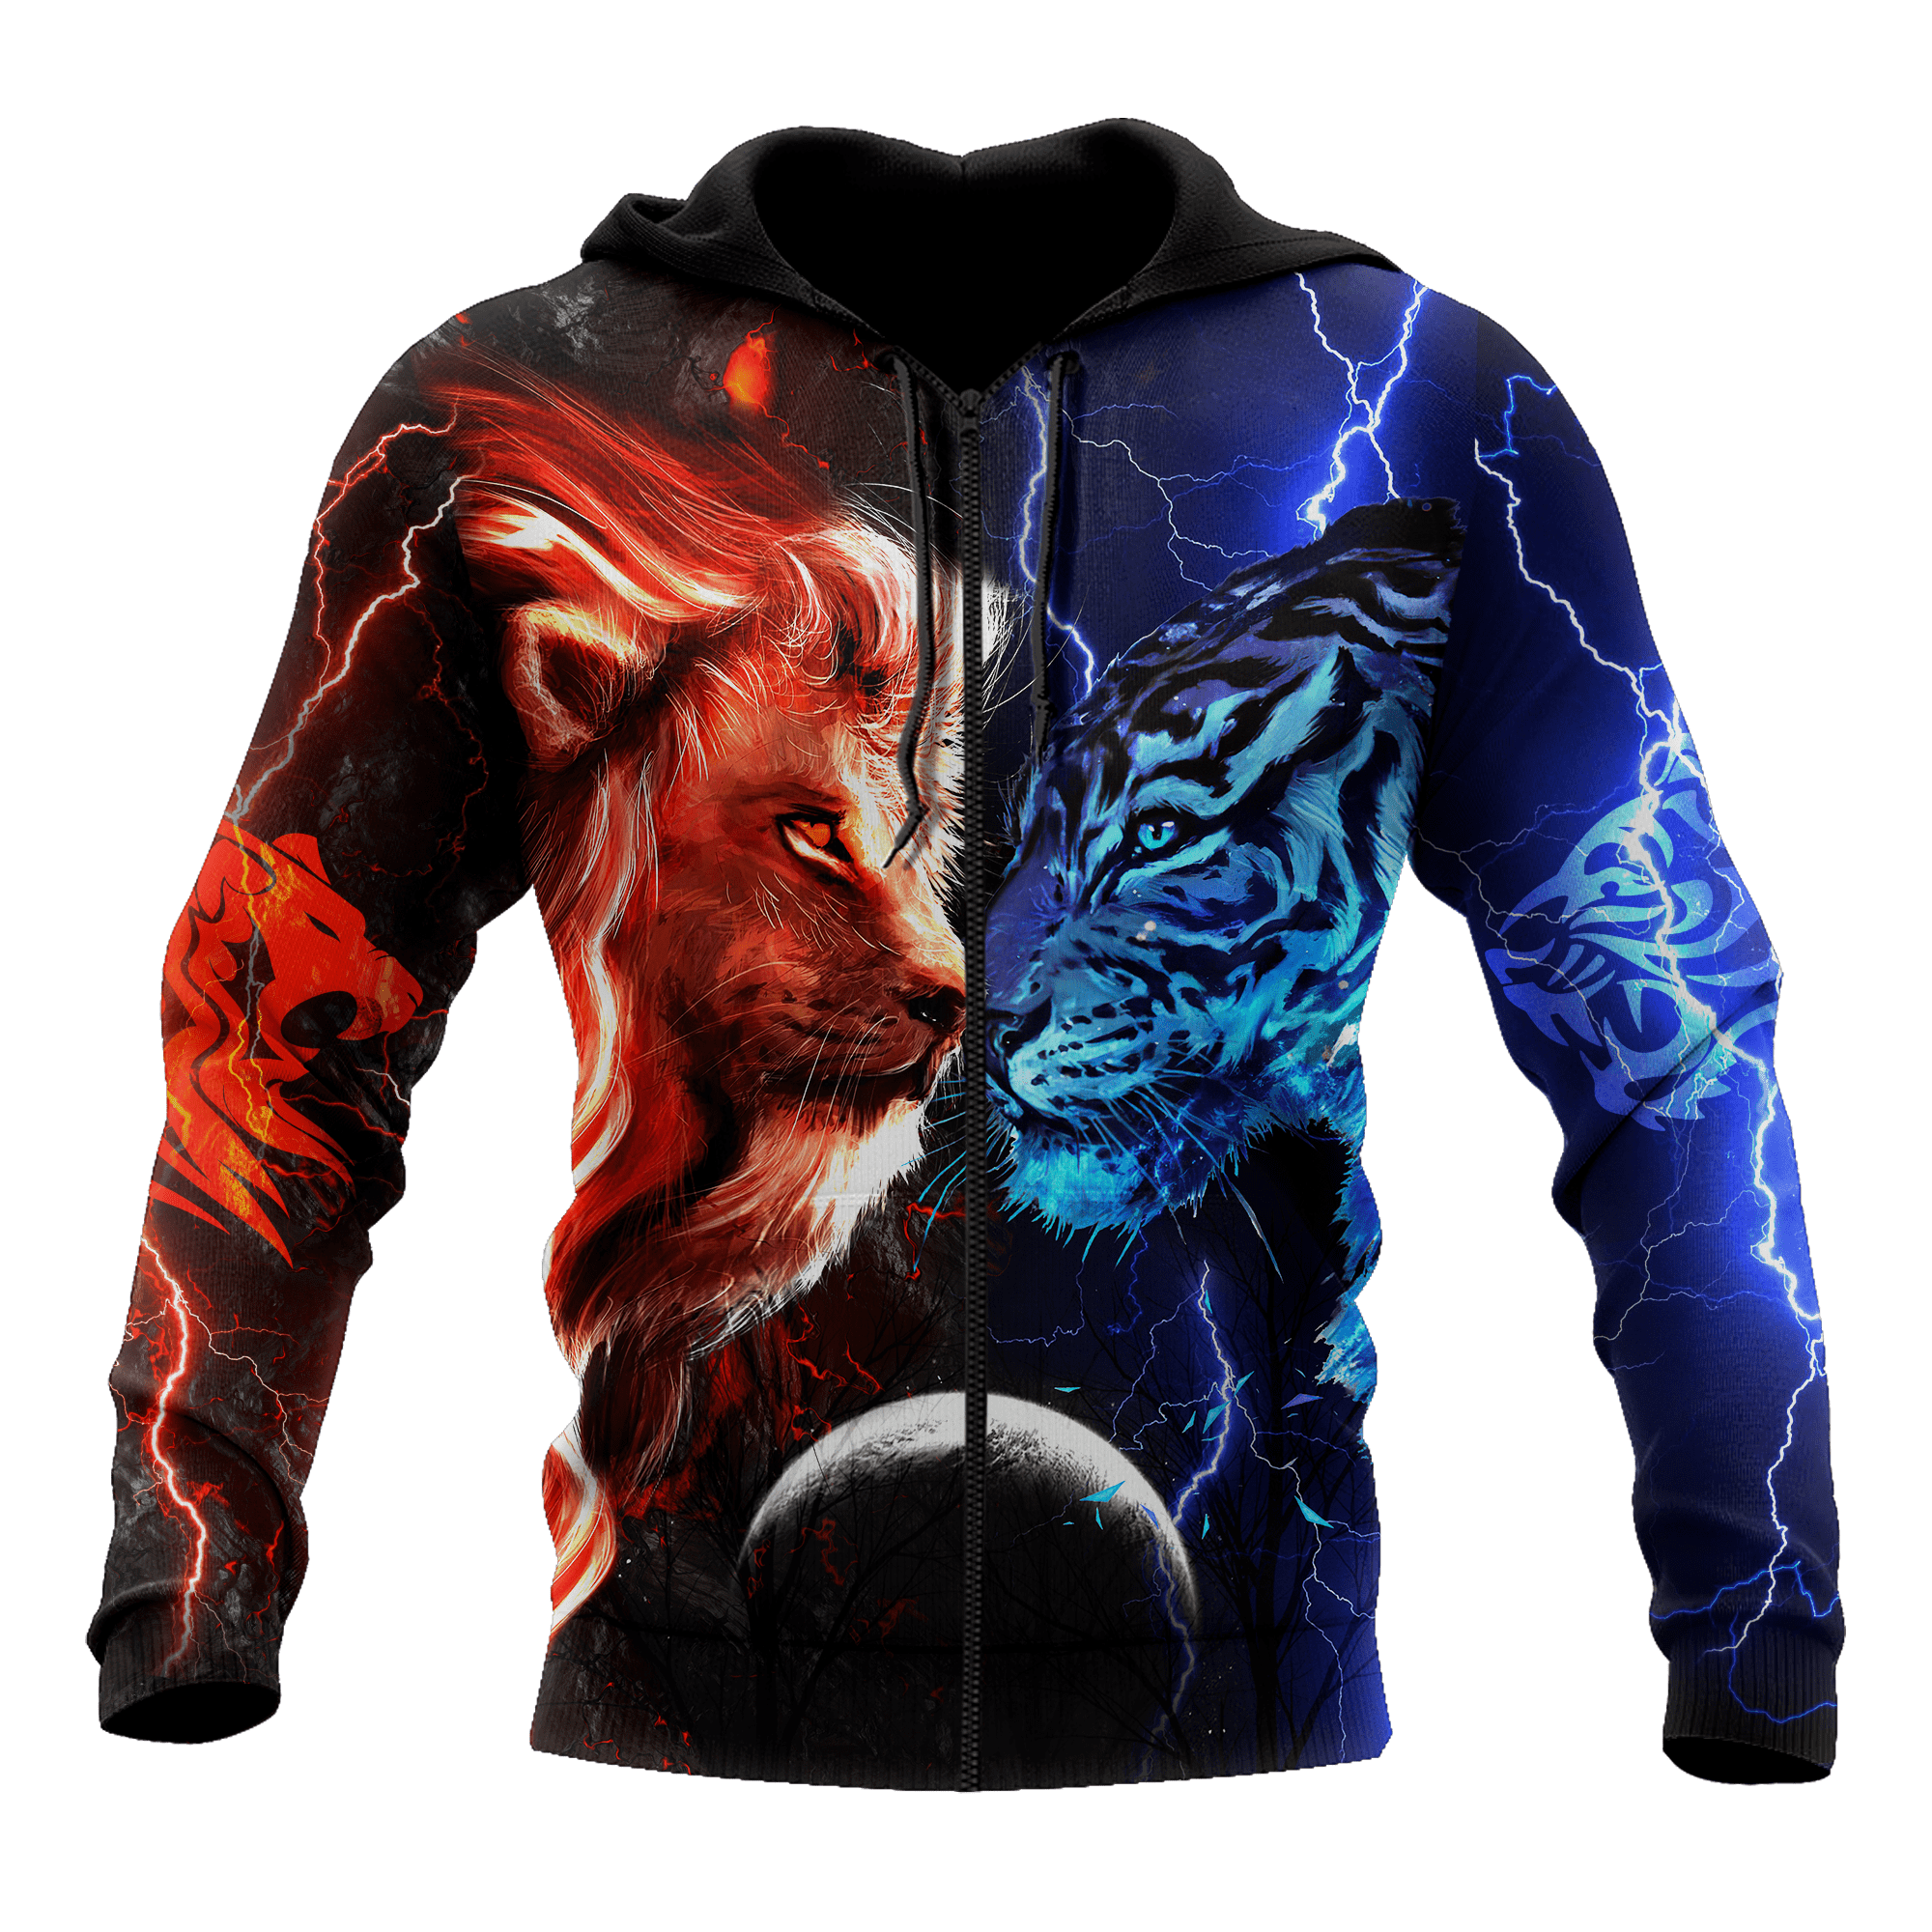 Tiger vs Lion Galaxy Thunder Over Printed Shirt For Men and Women